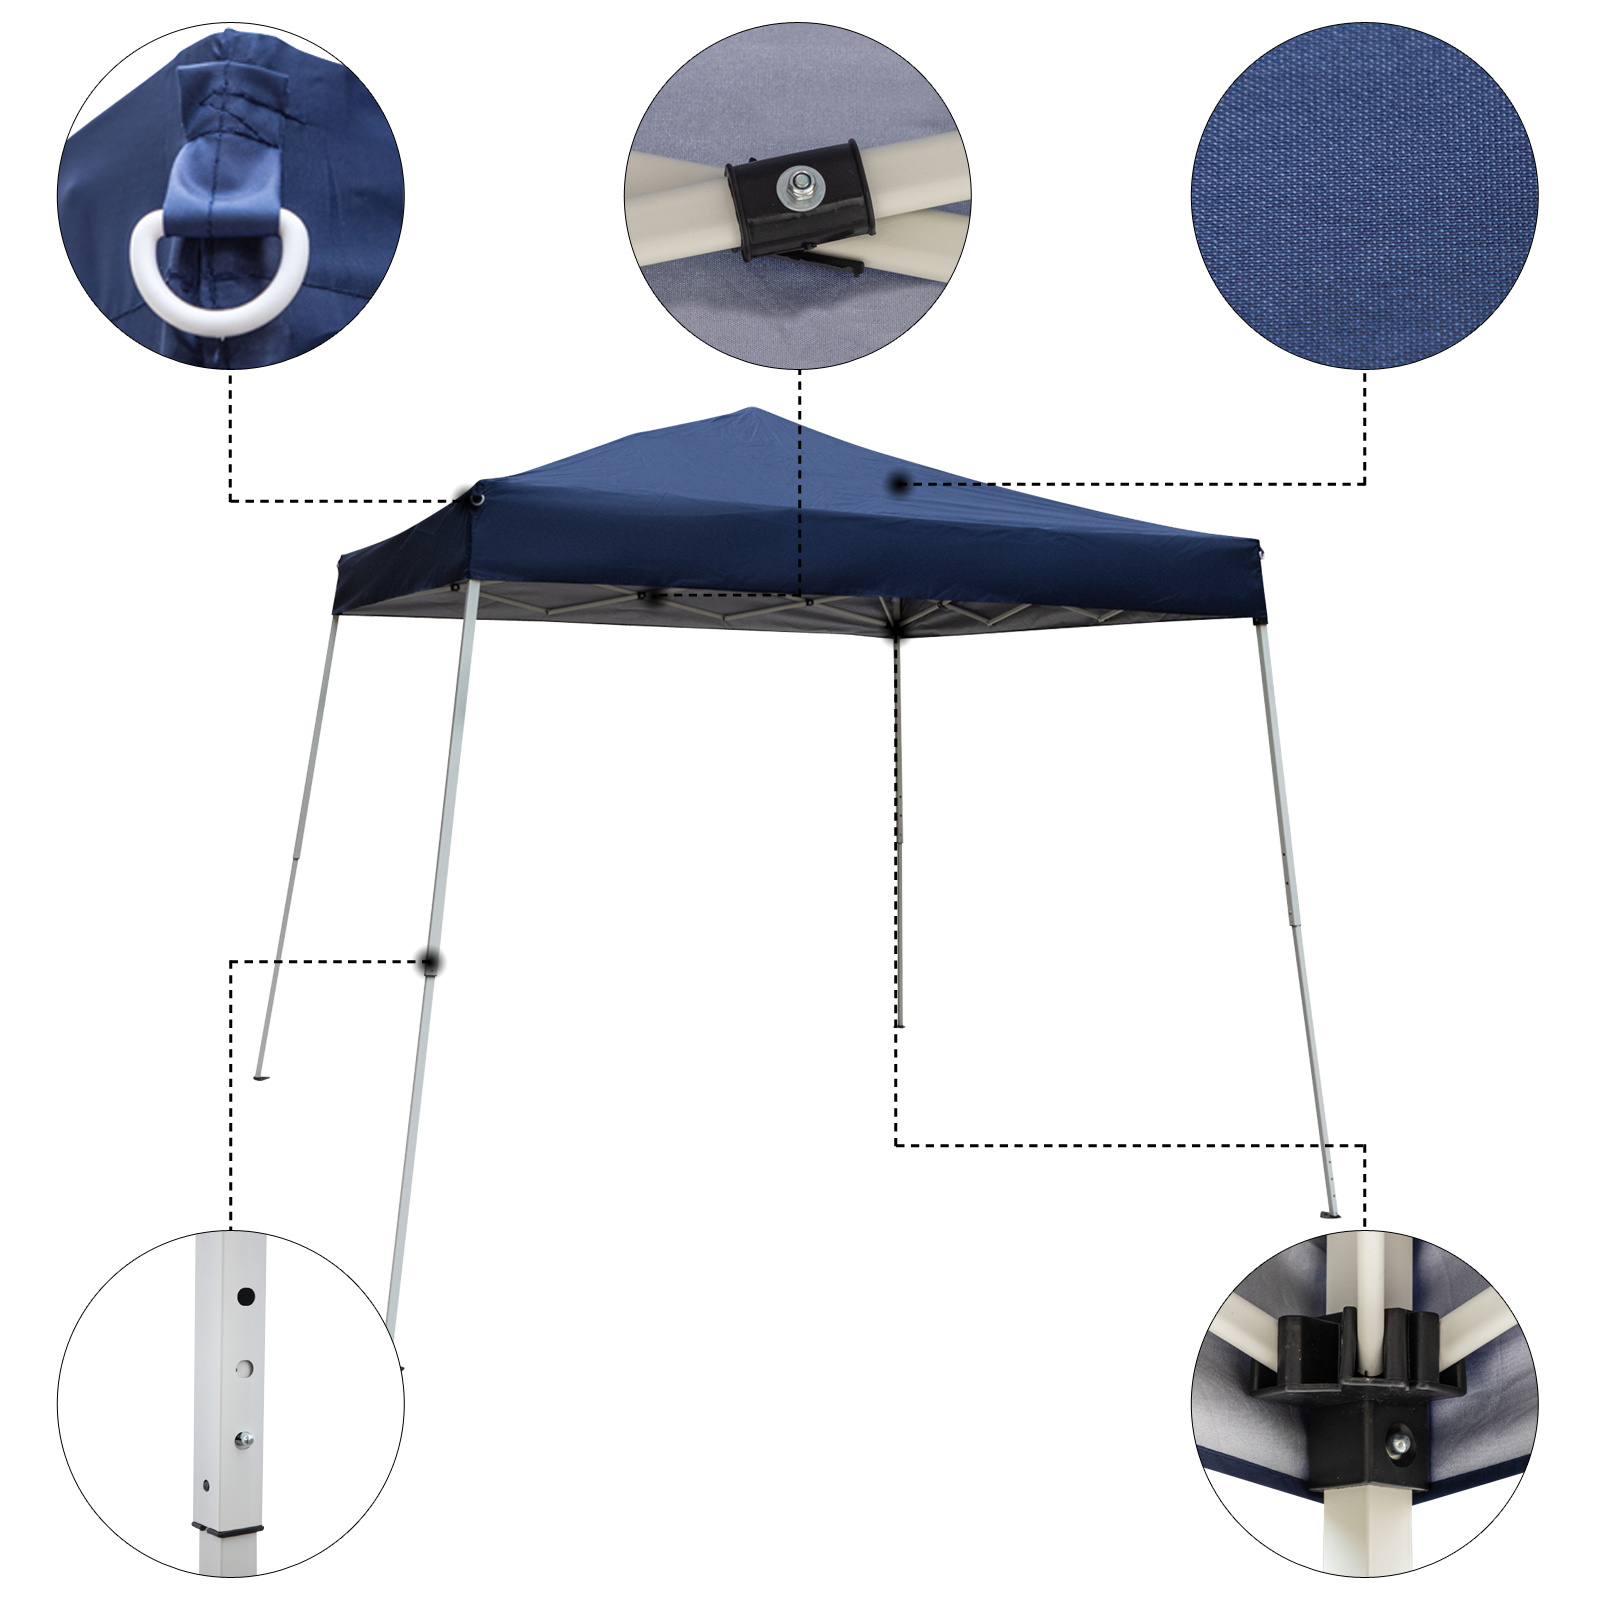 Zimtown 10ft x 10ft Base/8ft x 8ft Top Canopy Pop up Wedding Party Tent Folding Gazebo Beach Canopy Blue with Carry Bag - image 3 of 7